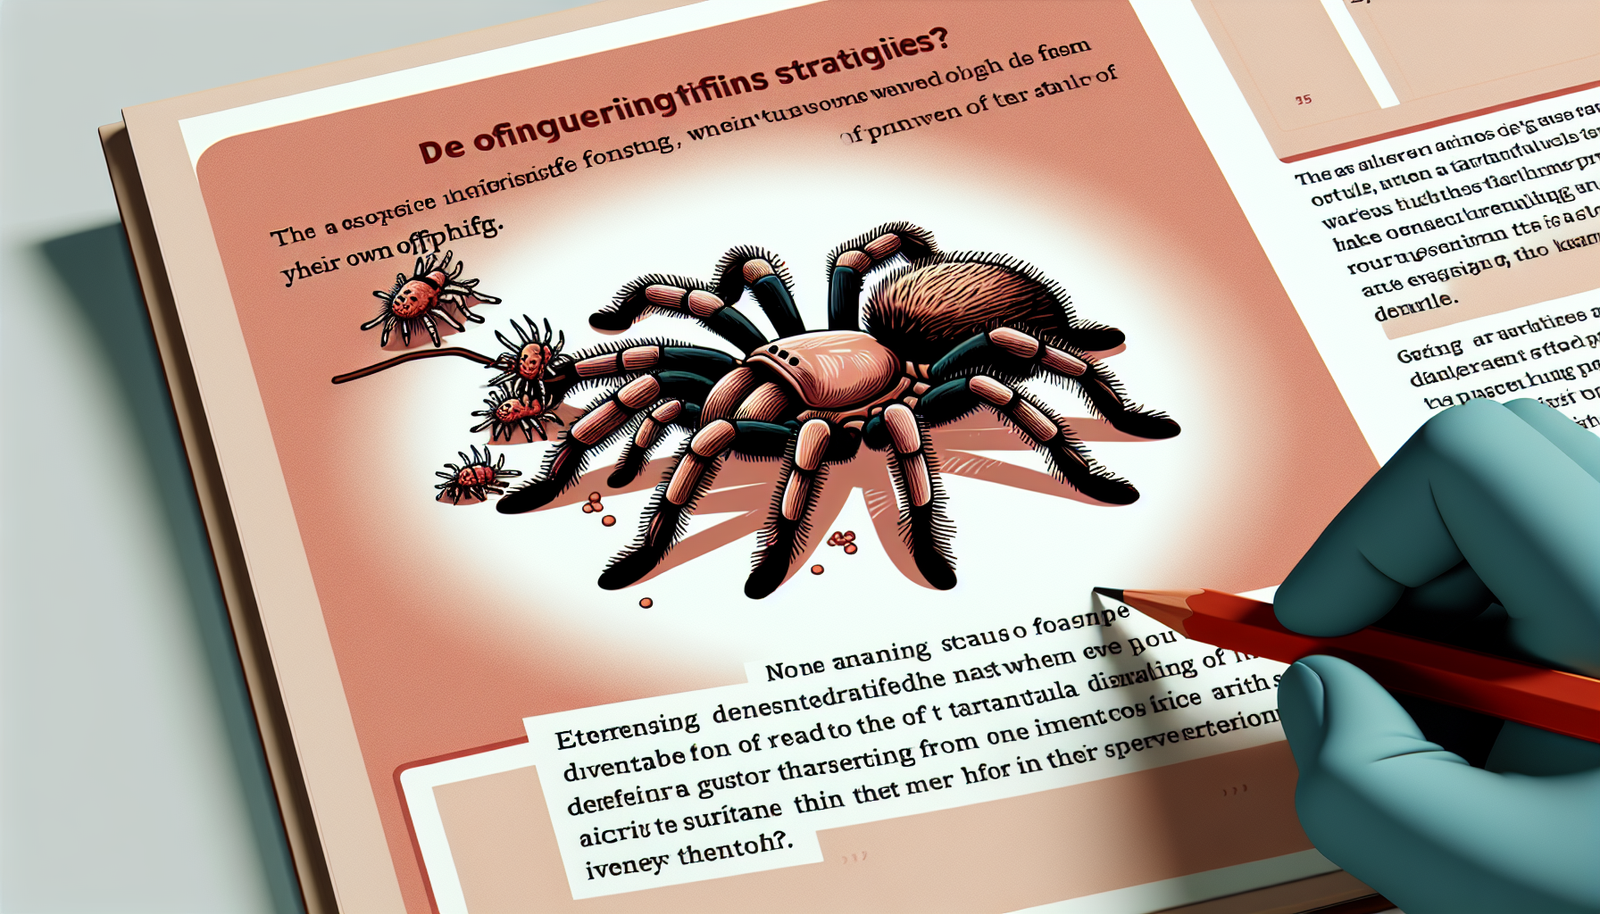 How Do Tarantulas Cope With Threats From Their Own Spiderlings?